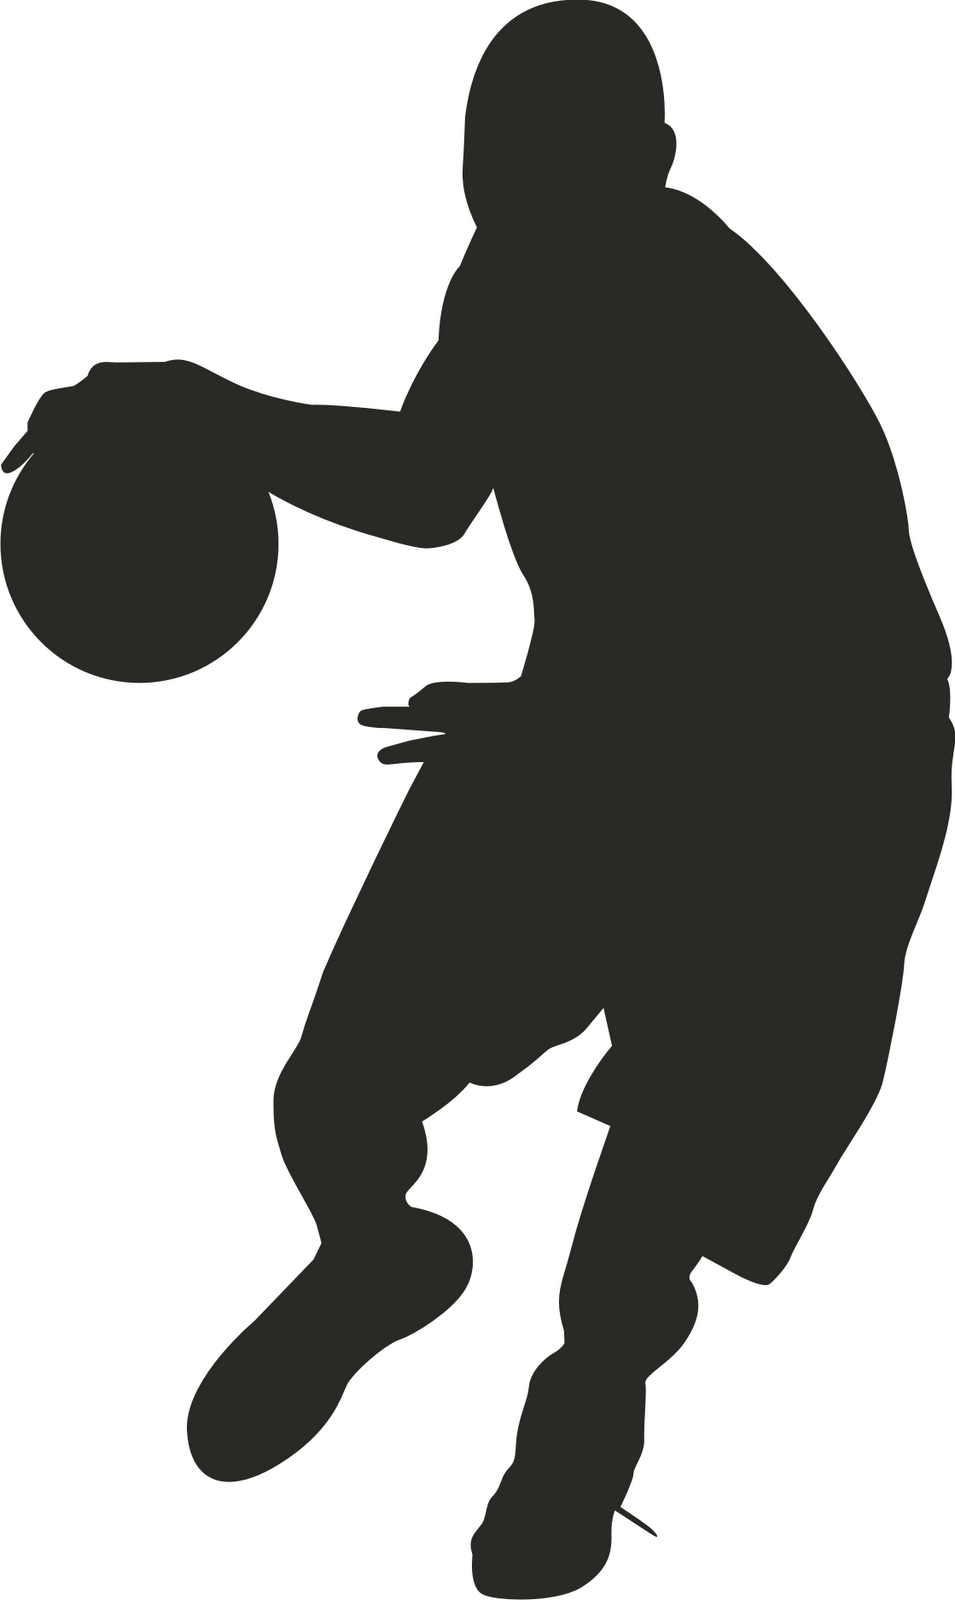 Images For > Nike Basketball Outline Vector